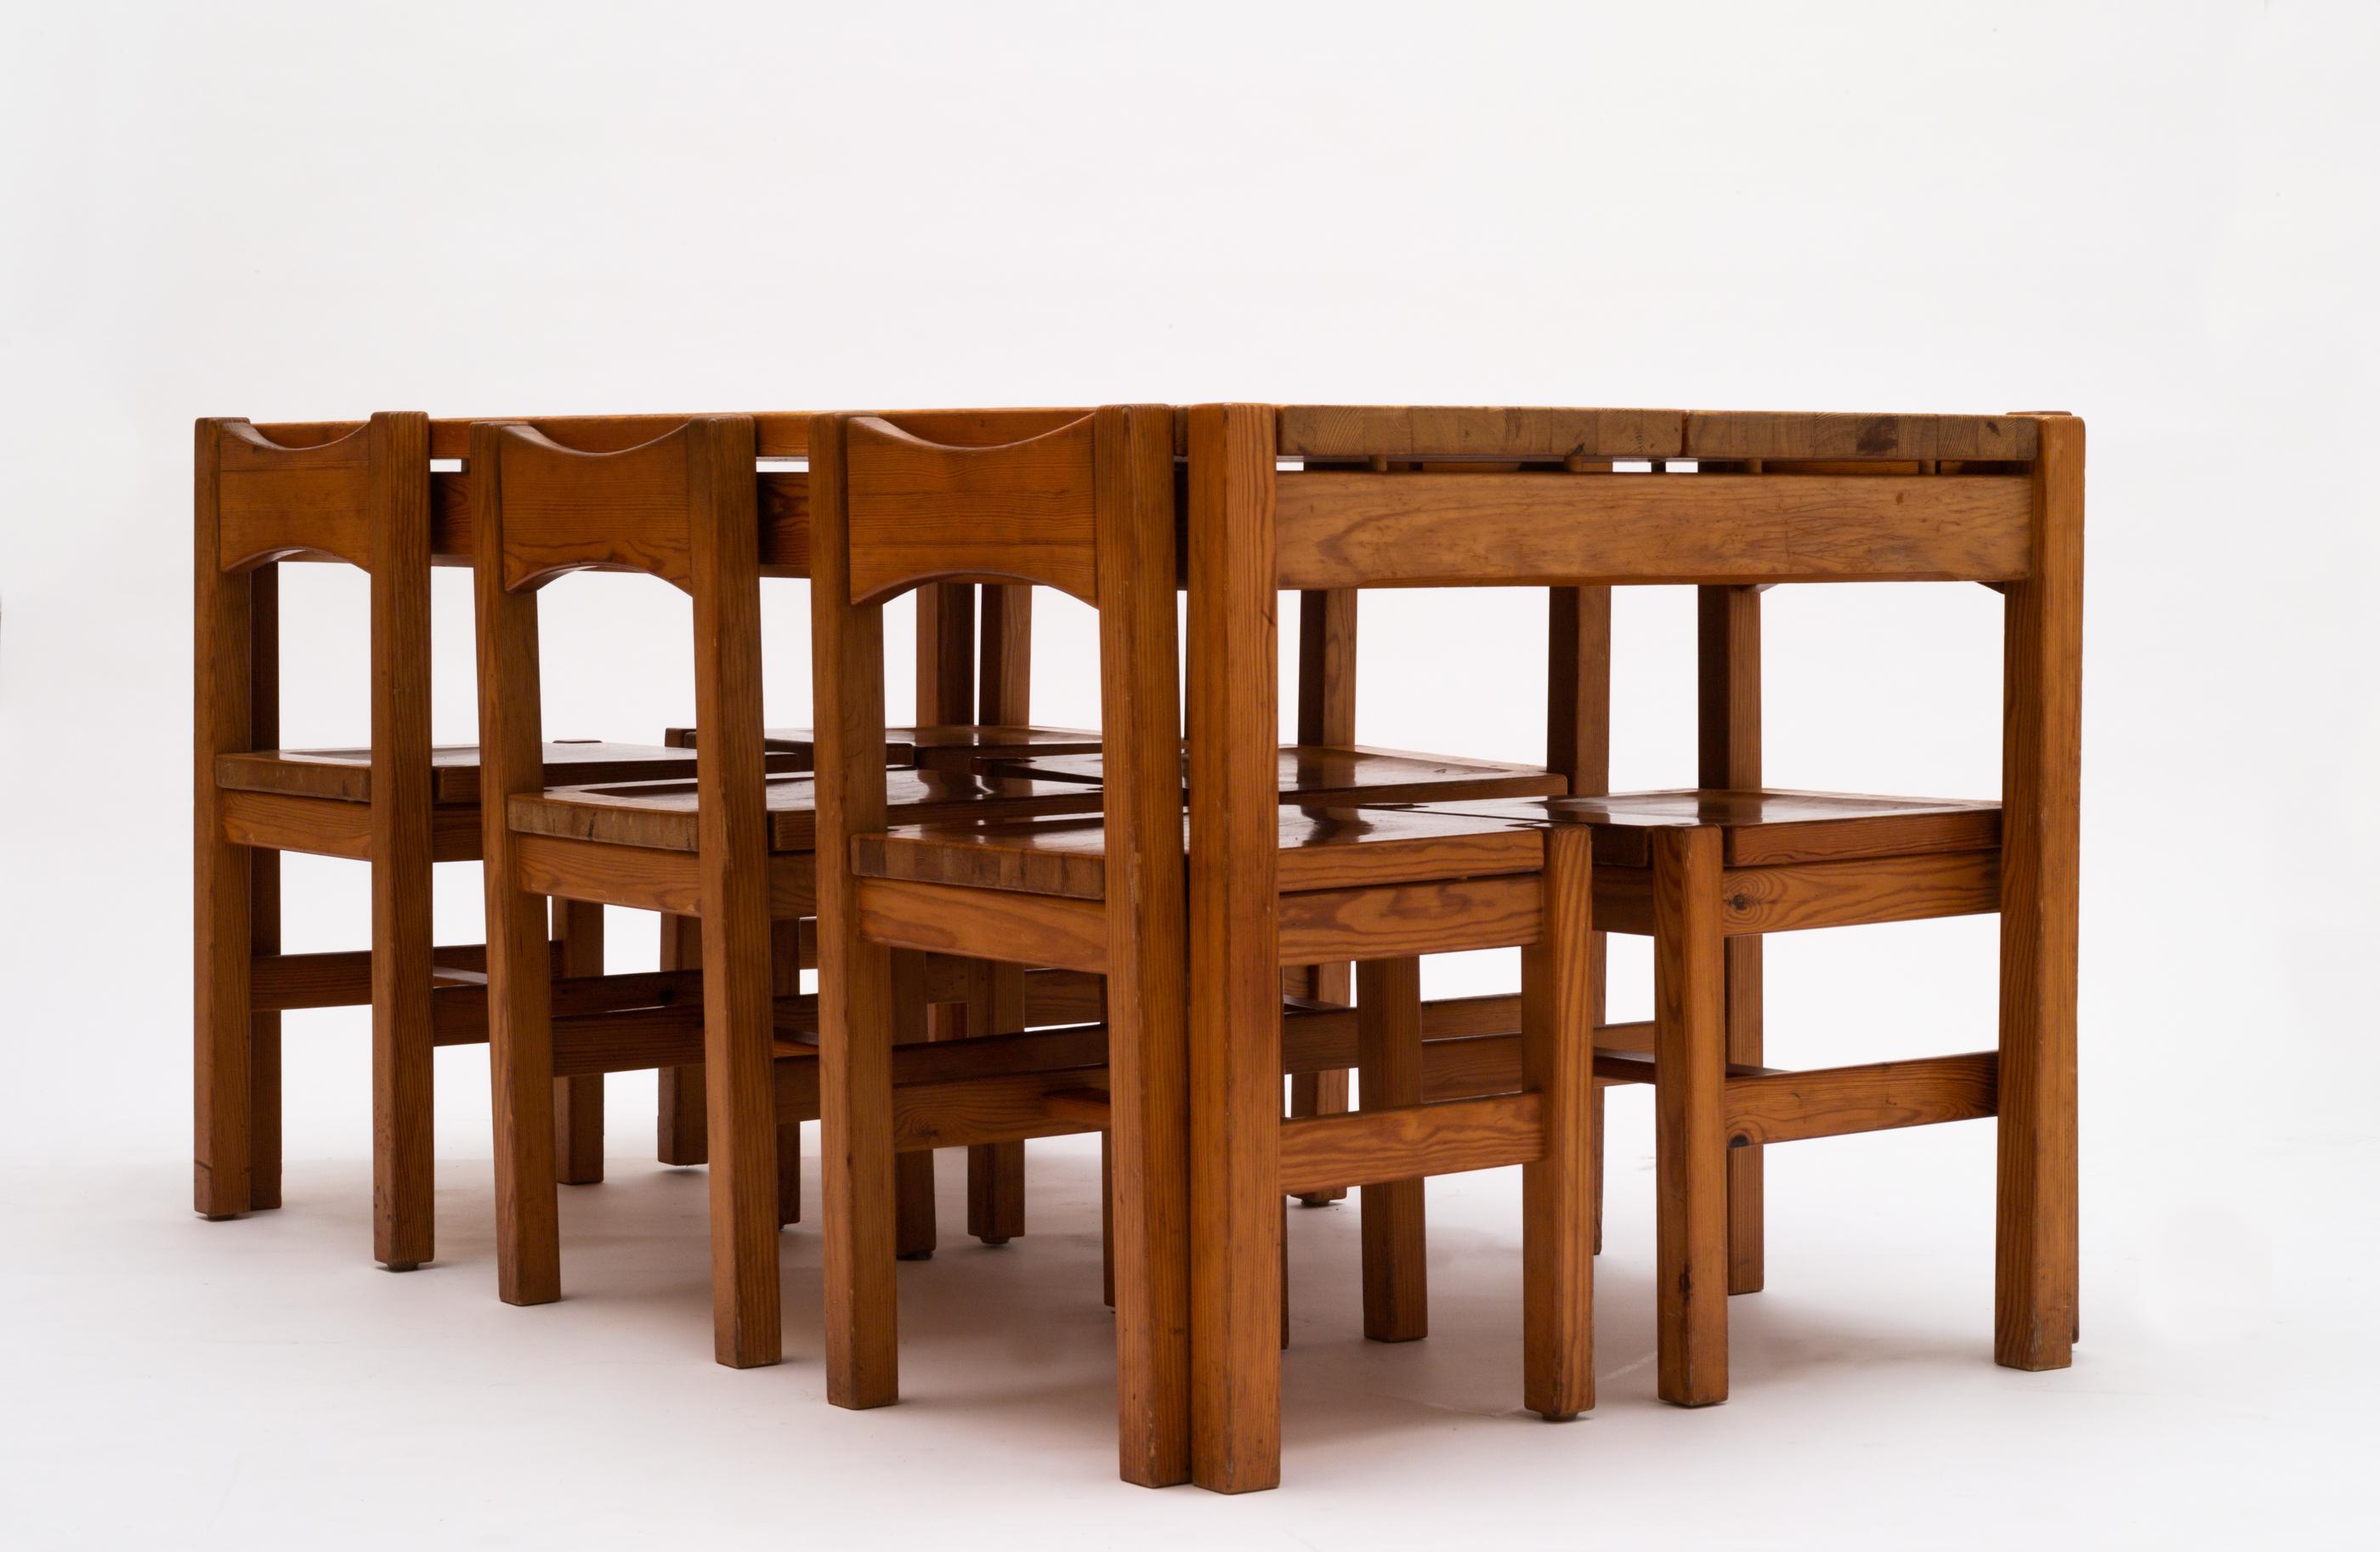 6 chairs and 1 dining table of solid pine, designed by Ilmari Tapiovaara for Laukan Puu OY.